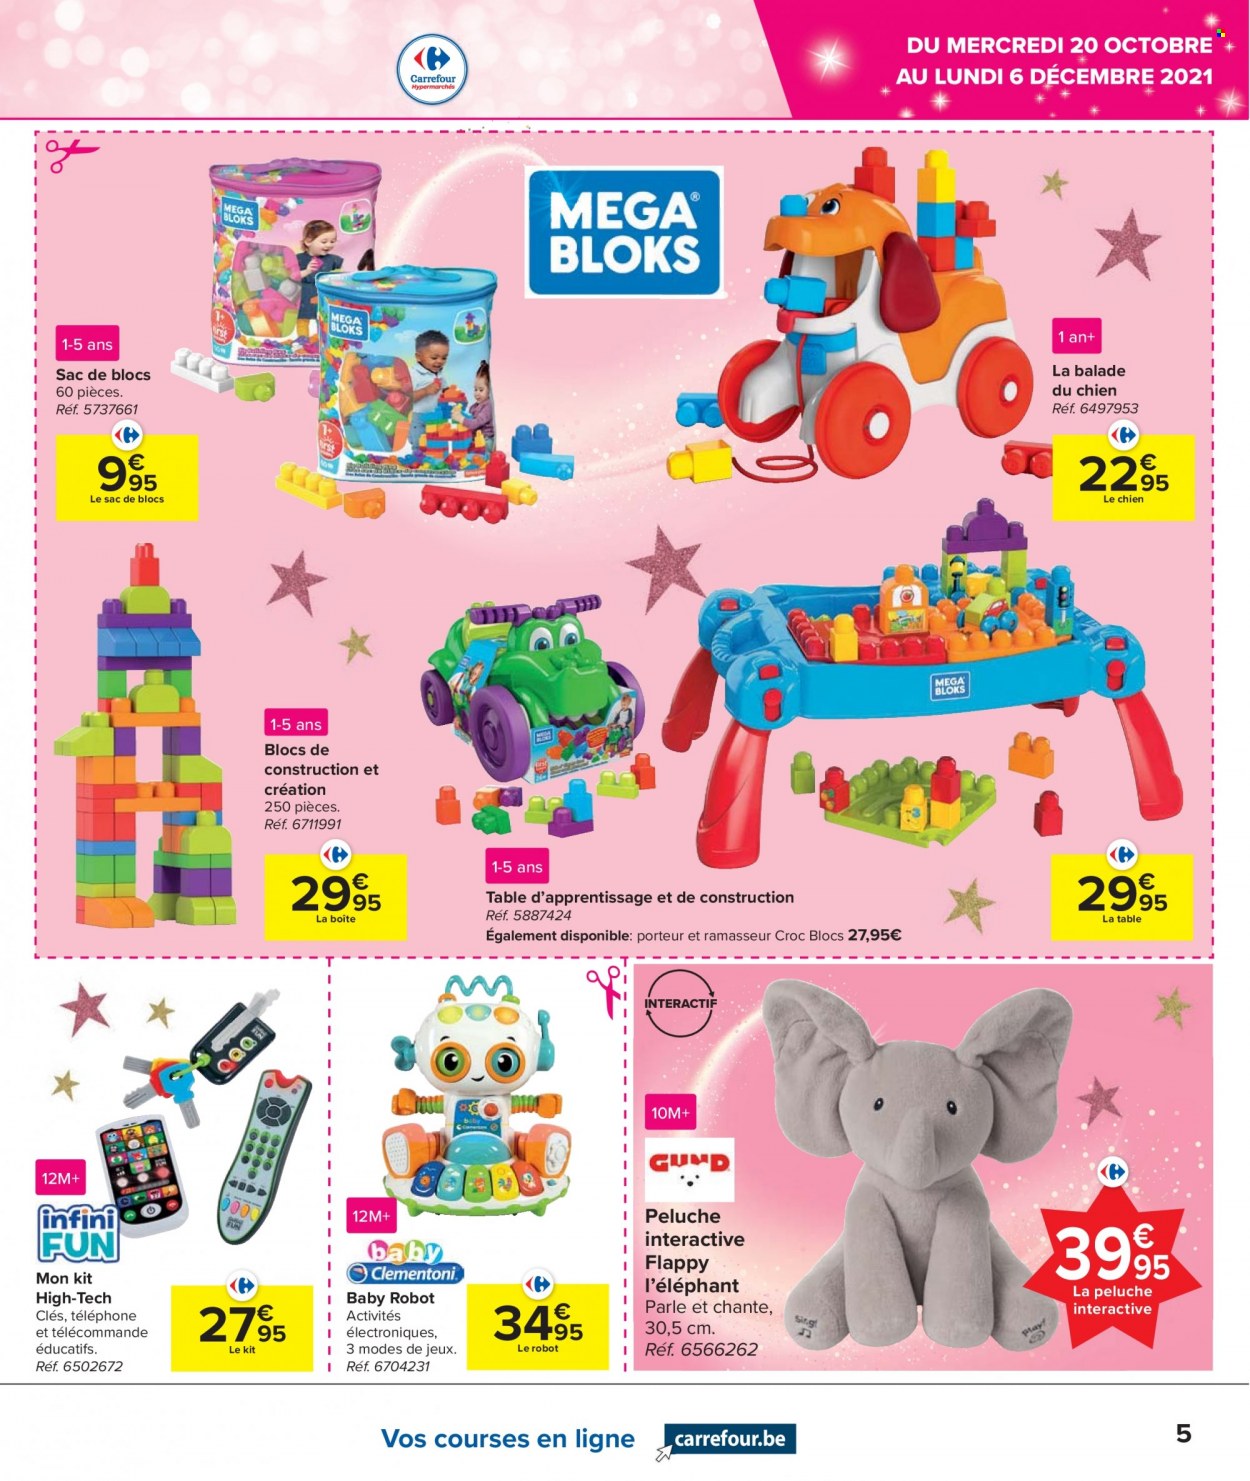 Catalogue Carrefour hypermarkt - 20.10.2021 - 6.12.2021. Page 5.